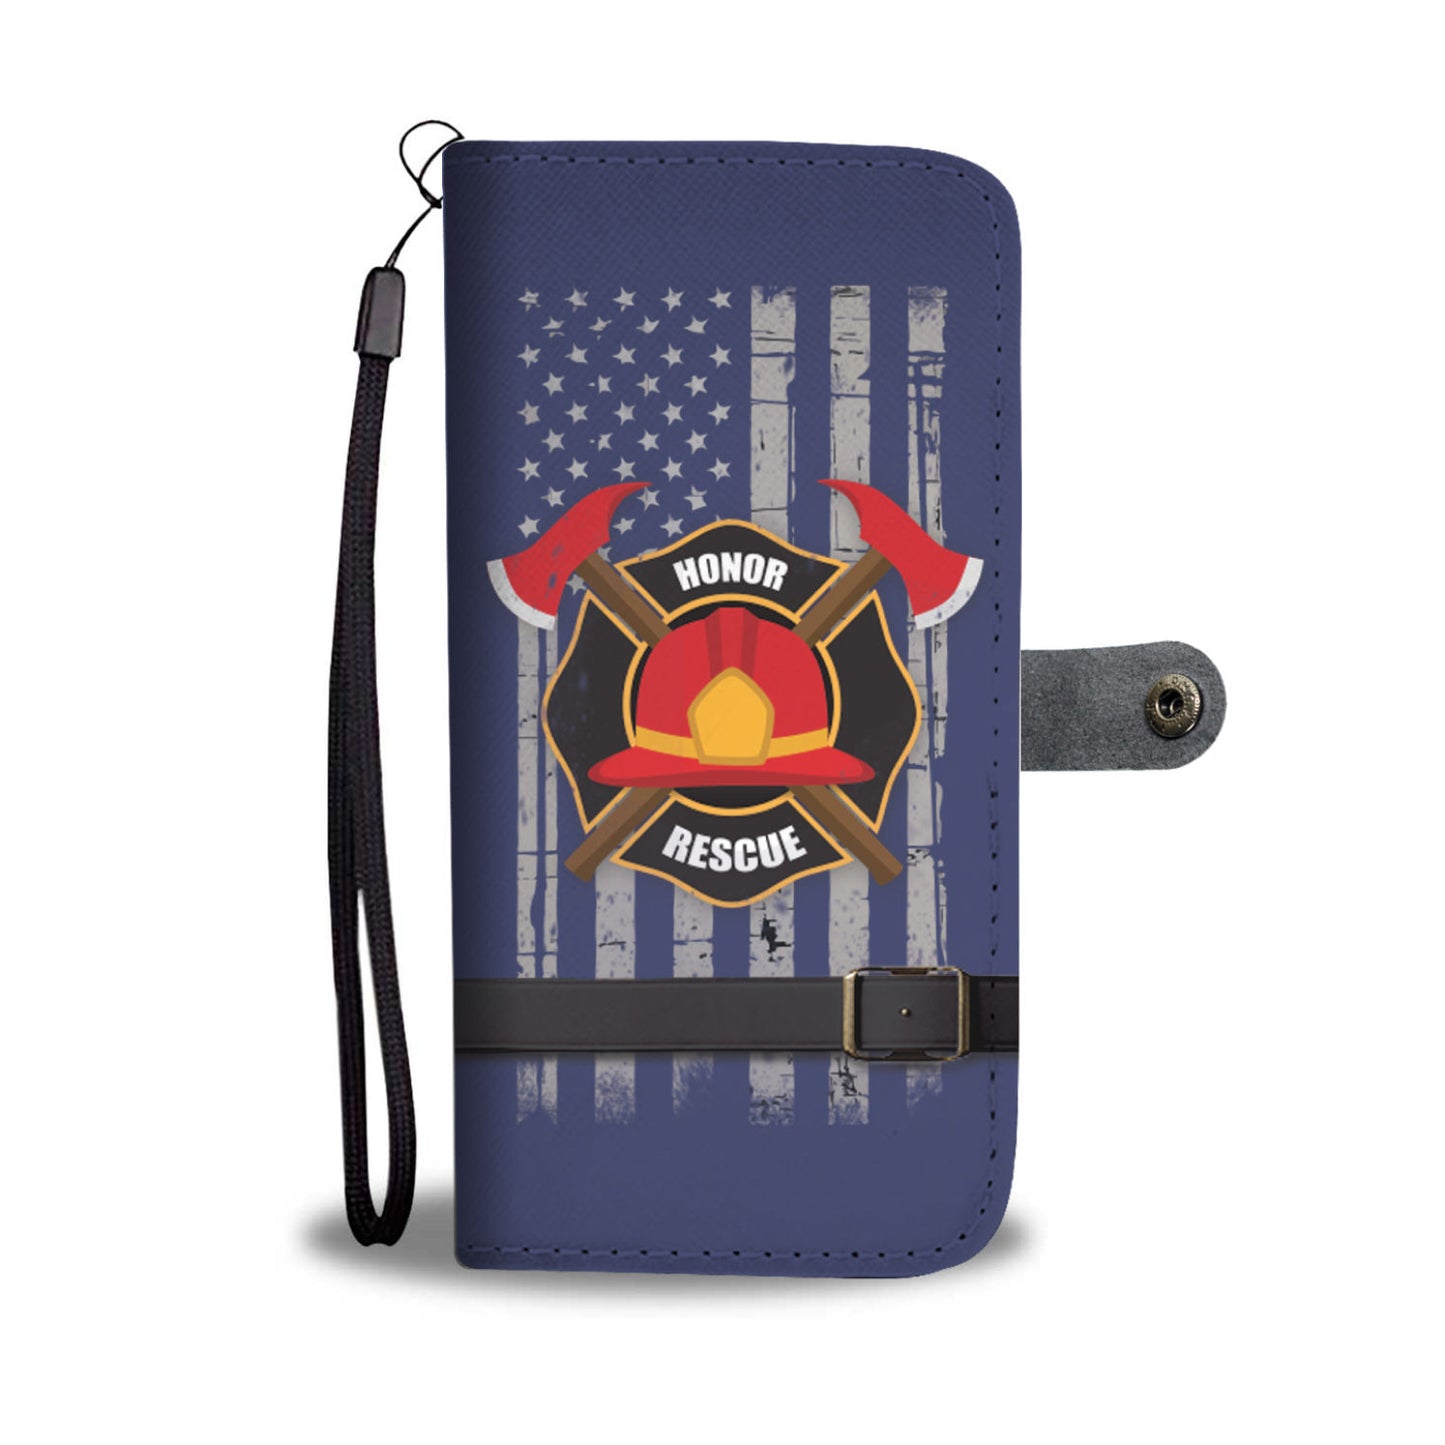 Honor Rescue Phone Wallet Case